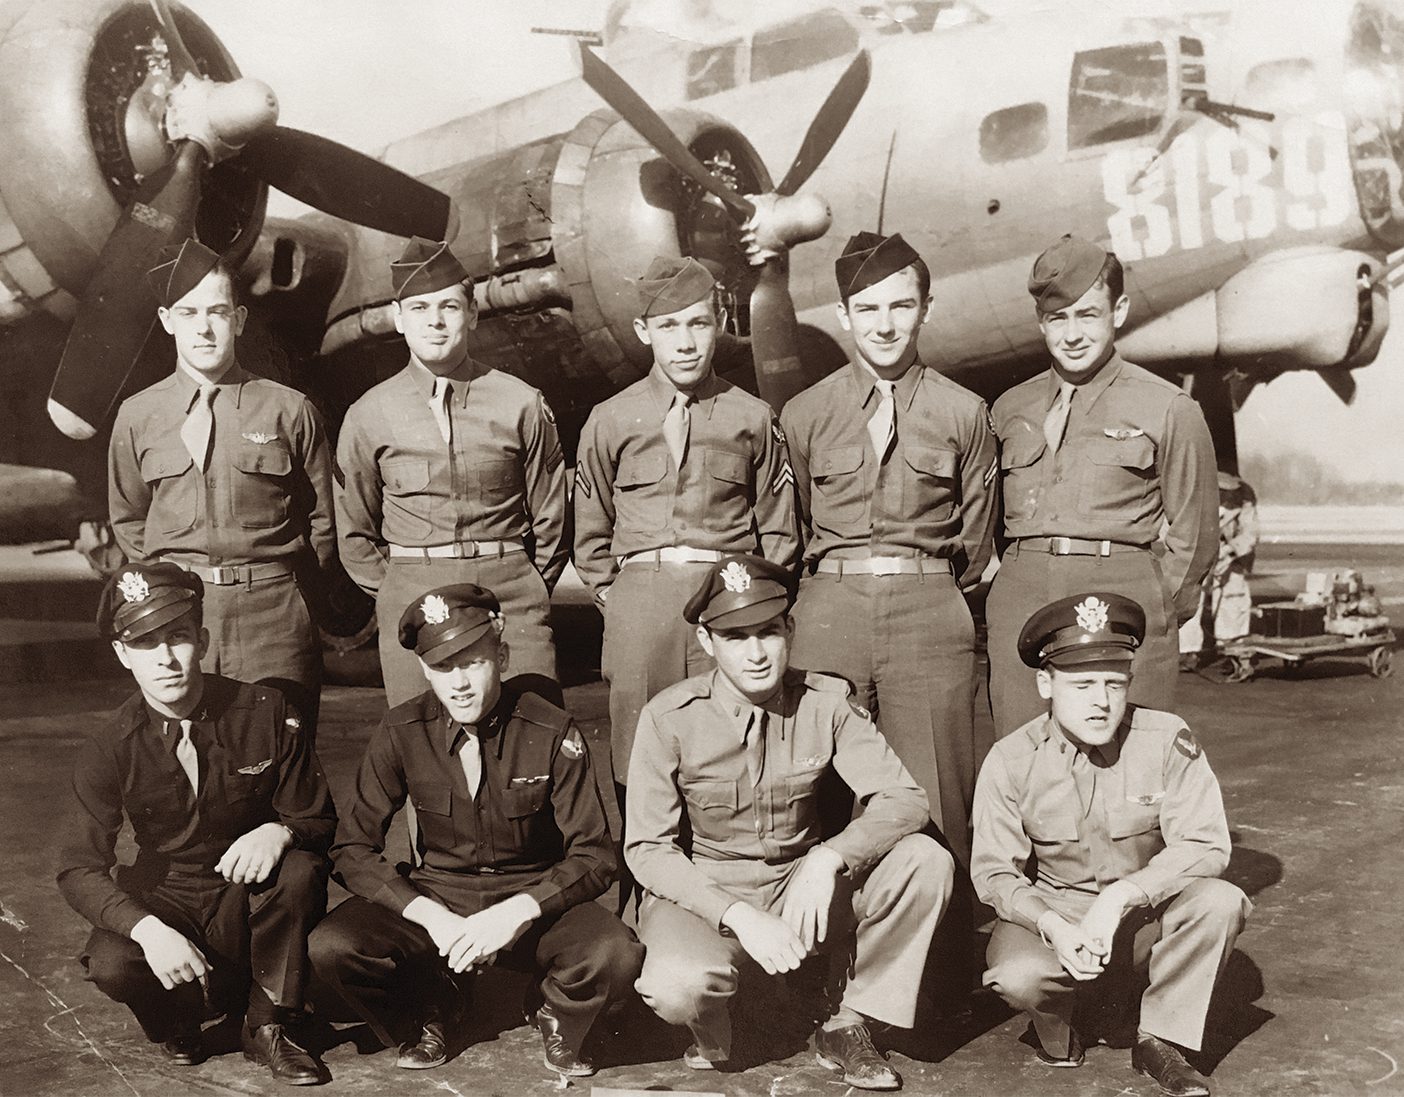 A sepia photo of nine men in military uniforms posing in front of a WWII airplane.